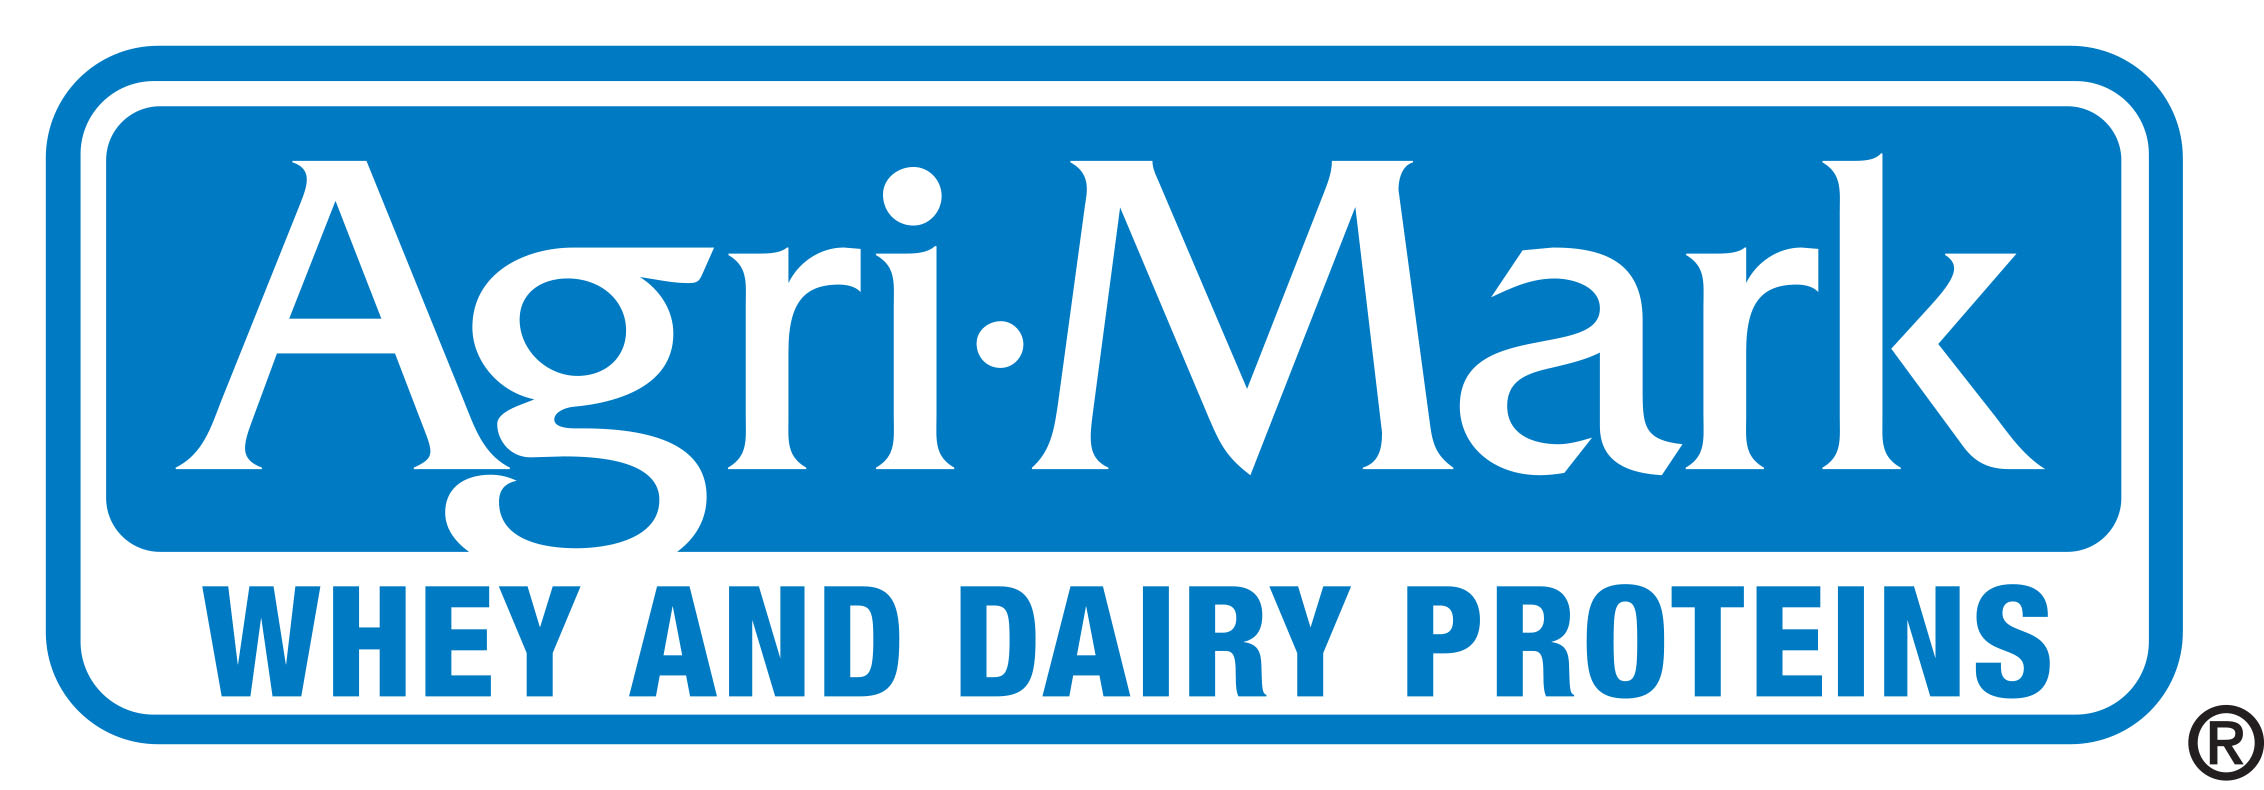 Agri-Mark Dairy Proteins